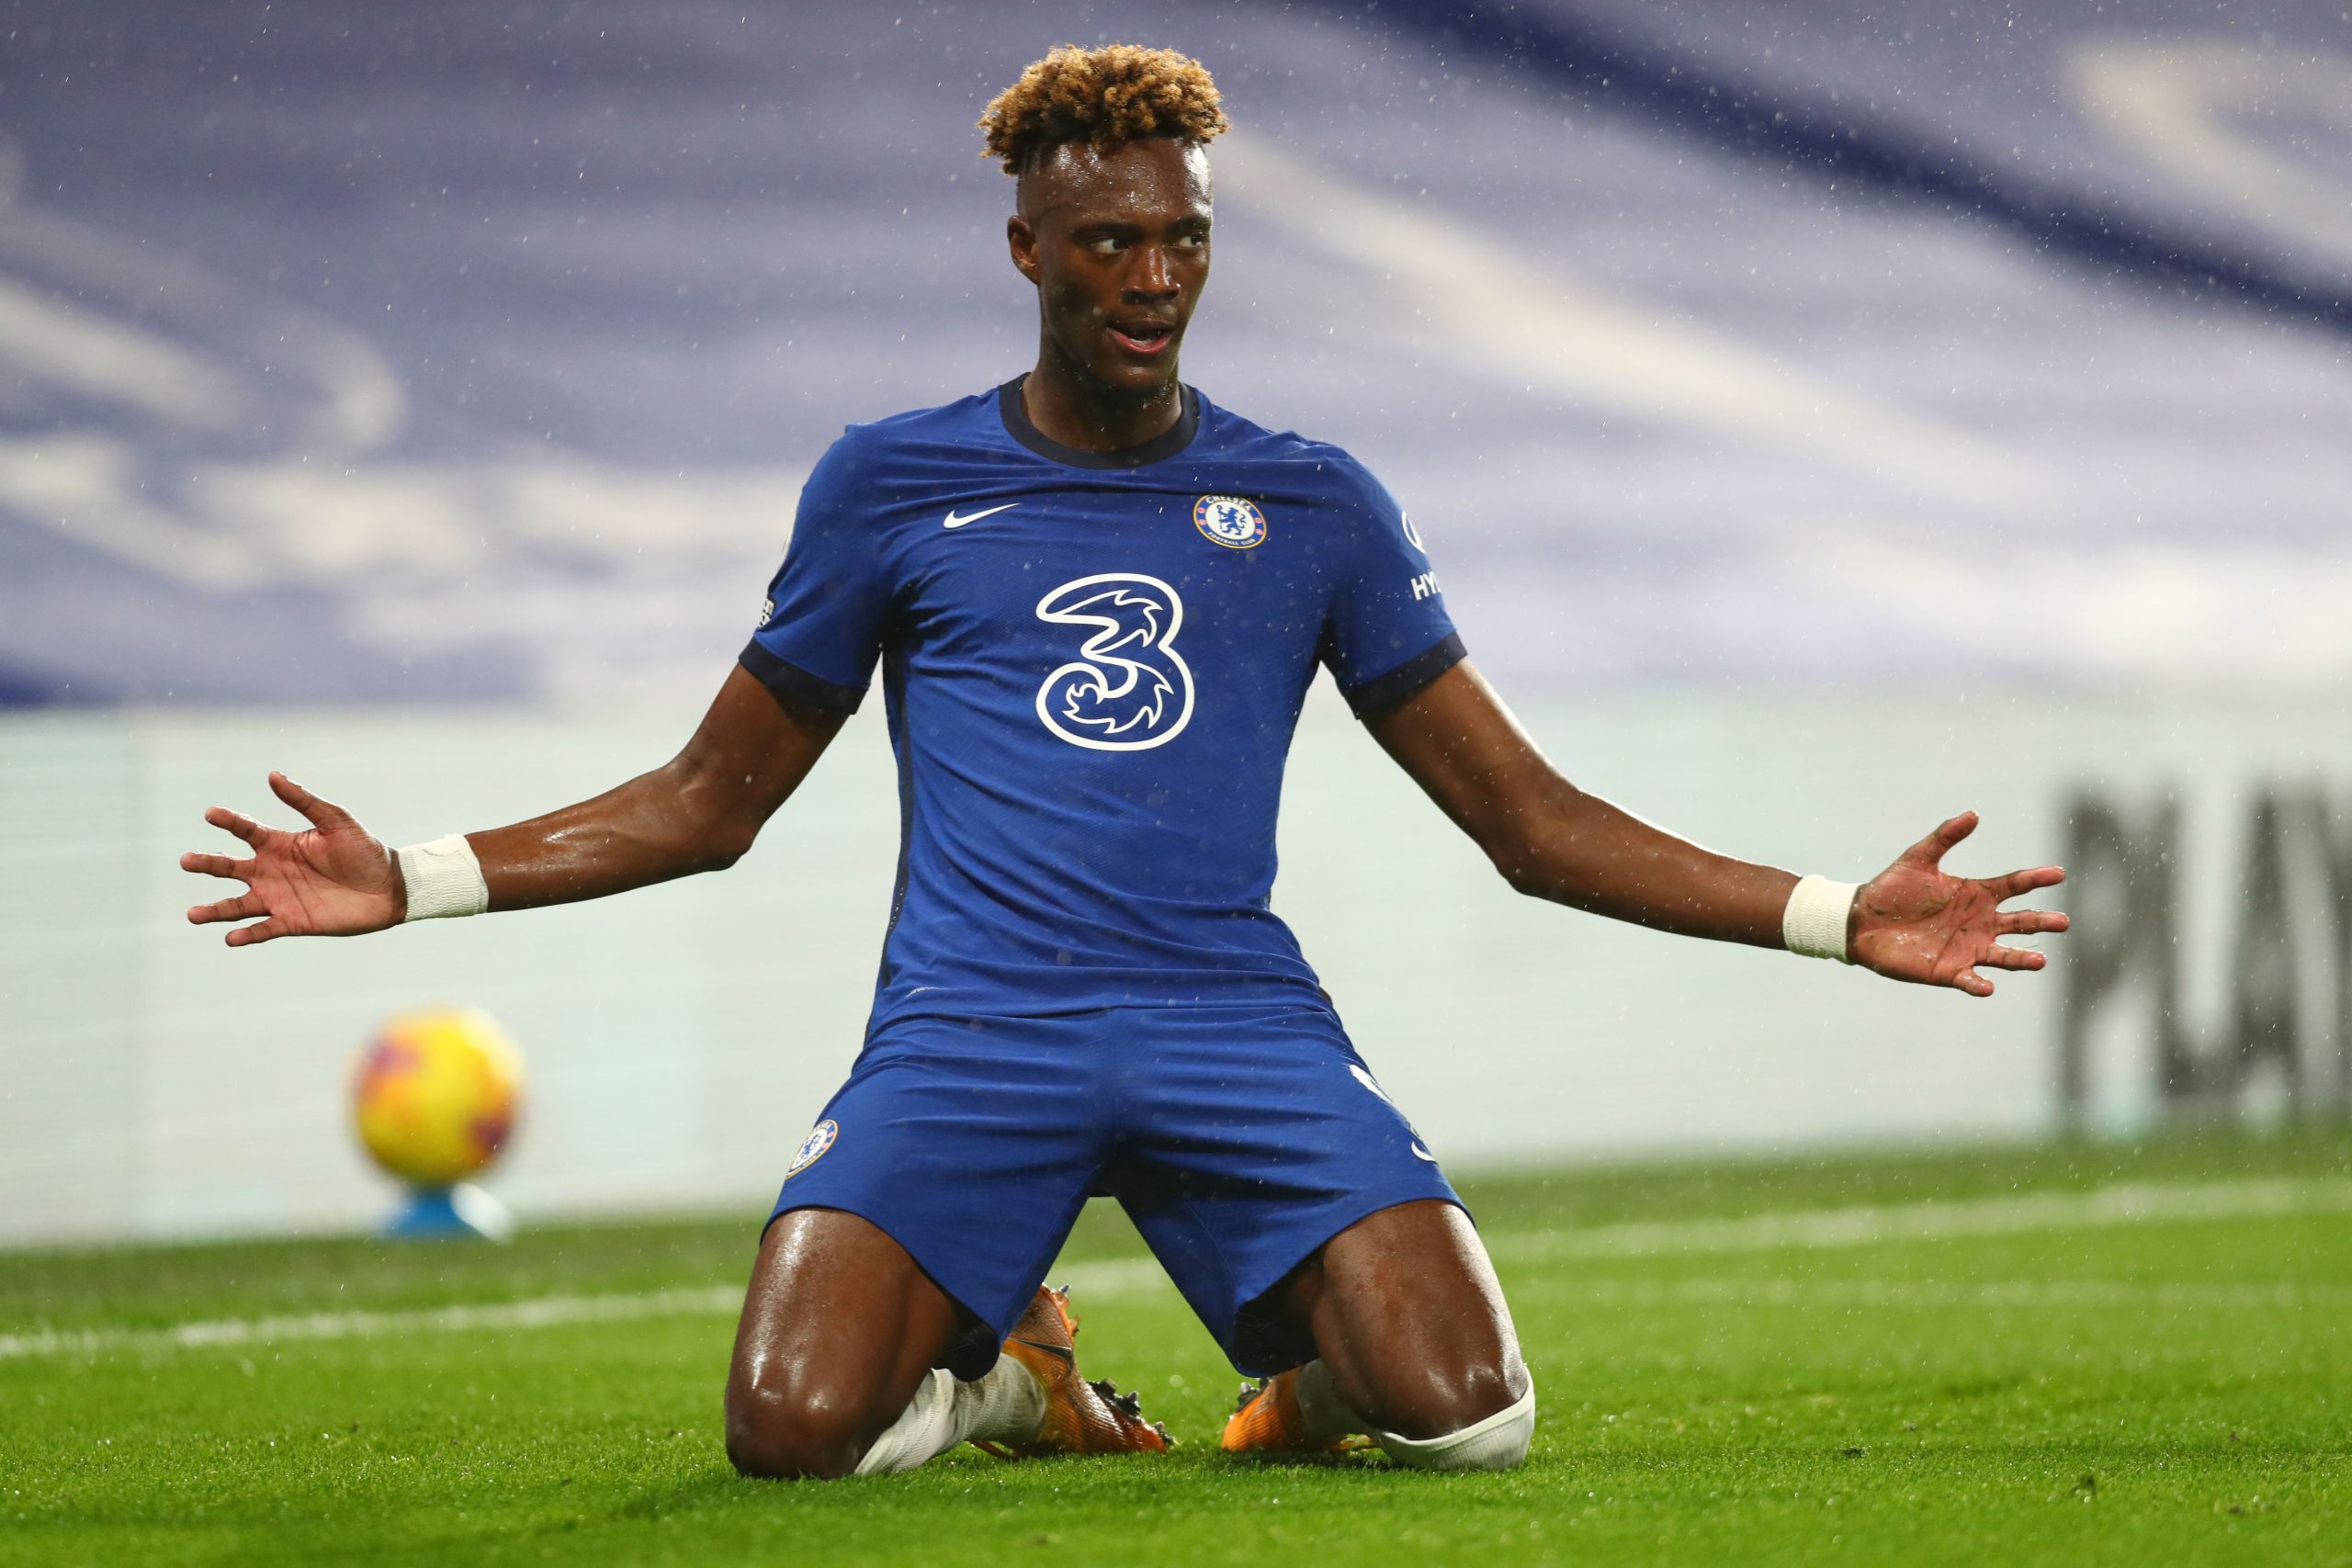 Tuchel reveals reason behind Chelsea striker Abraham's exclusion (Abraham is celebrating in the photo)